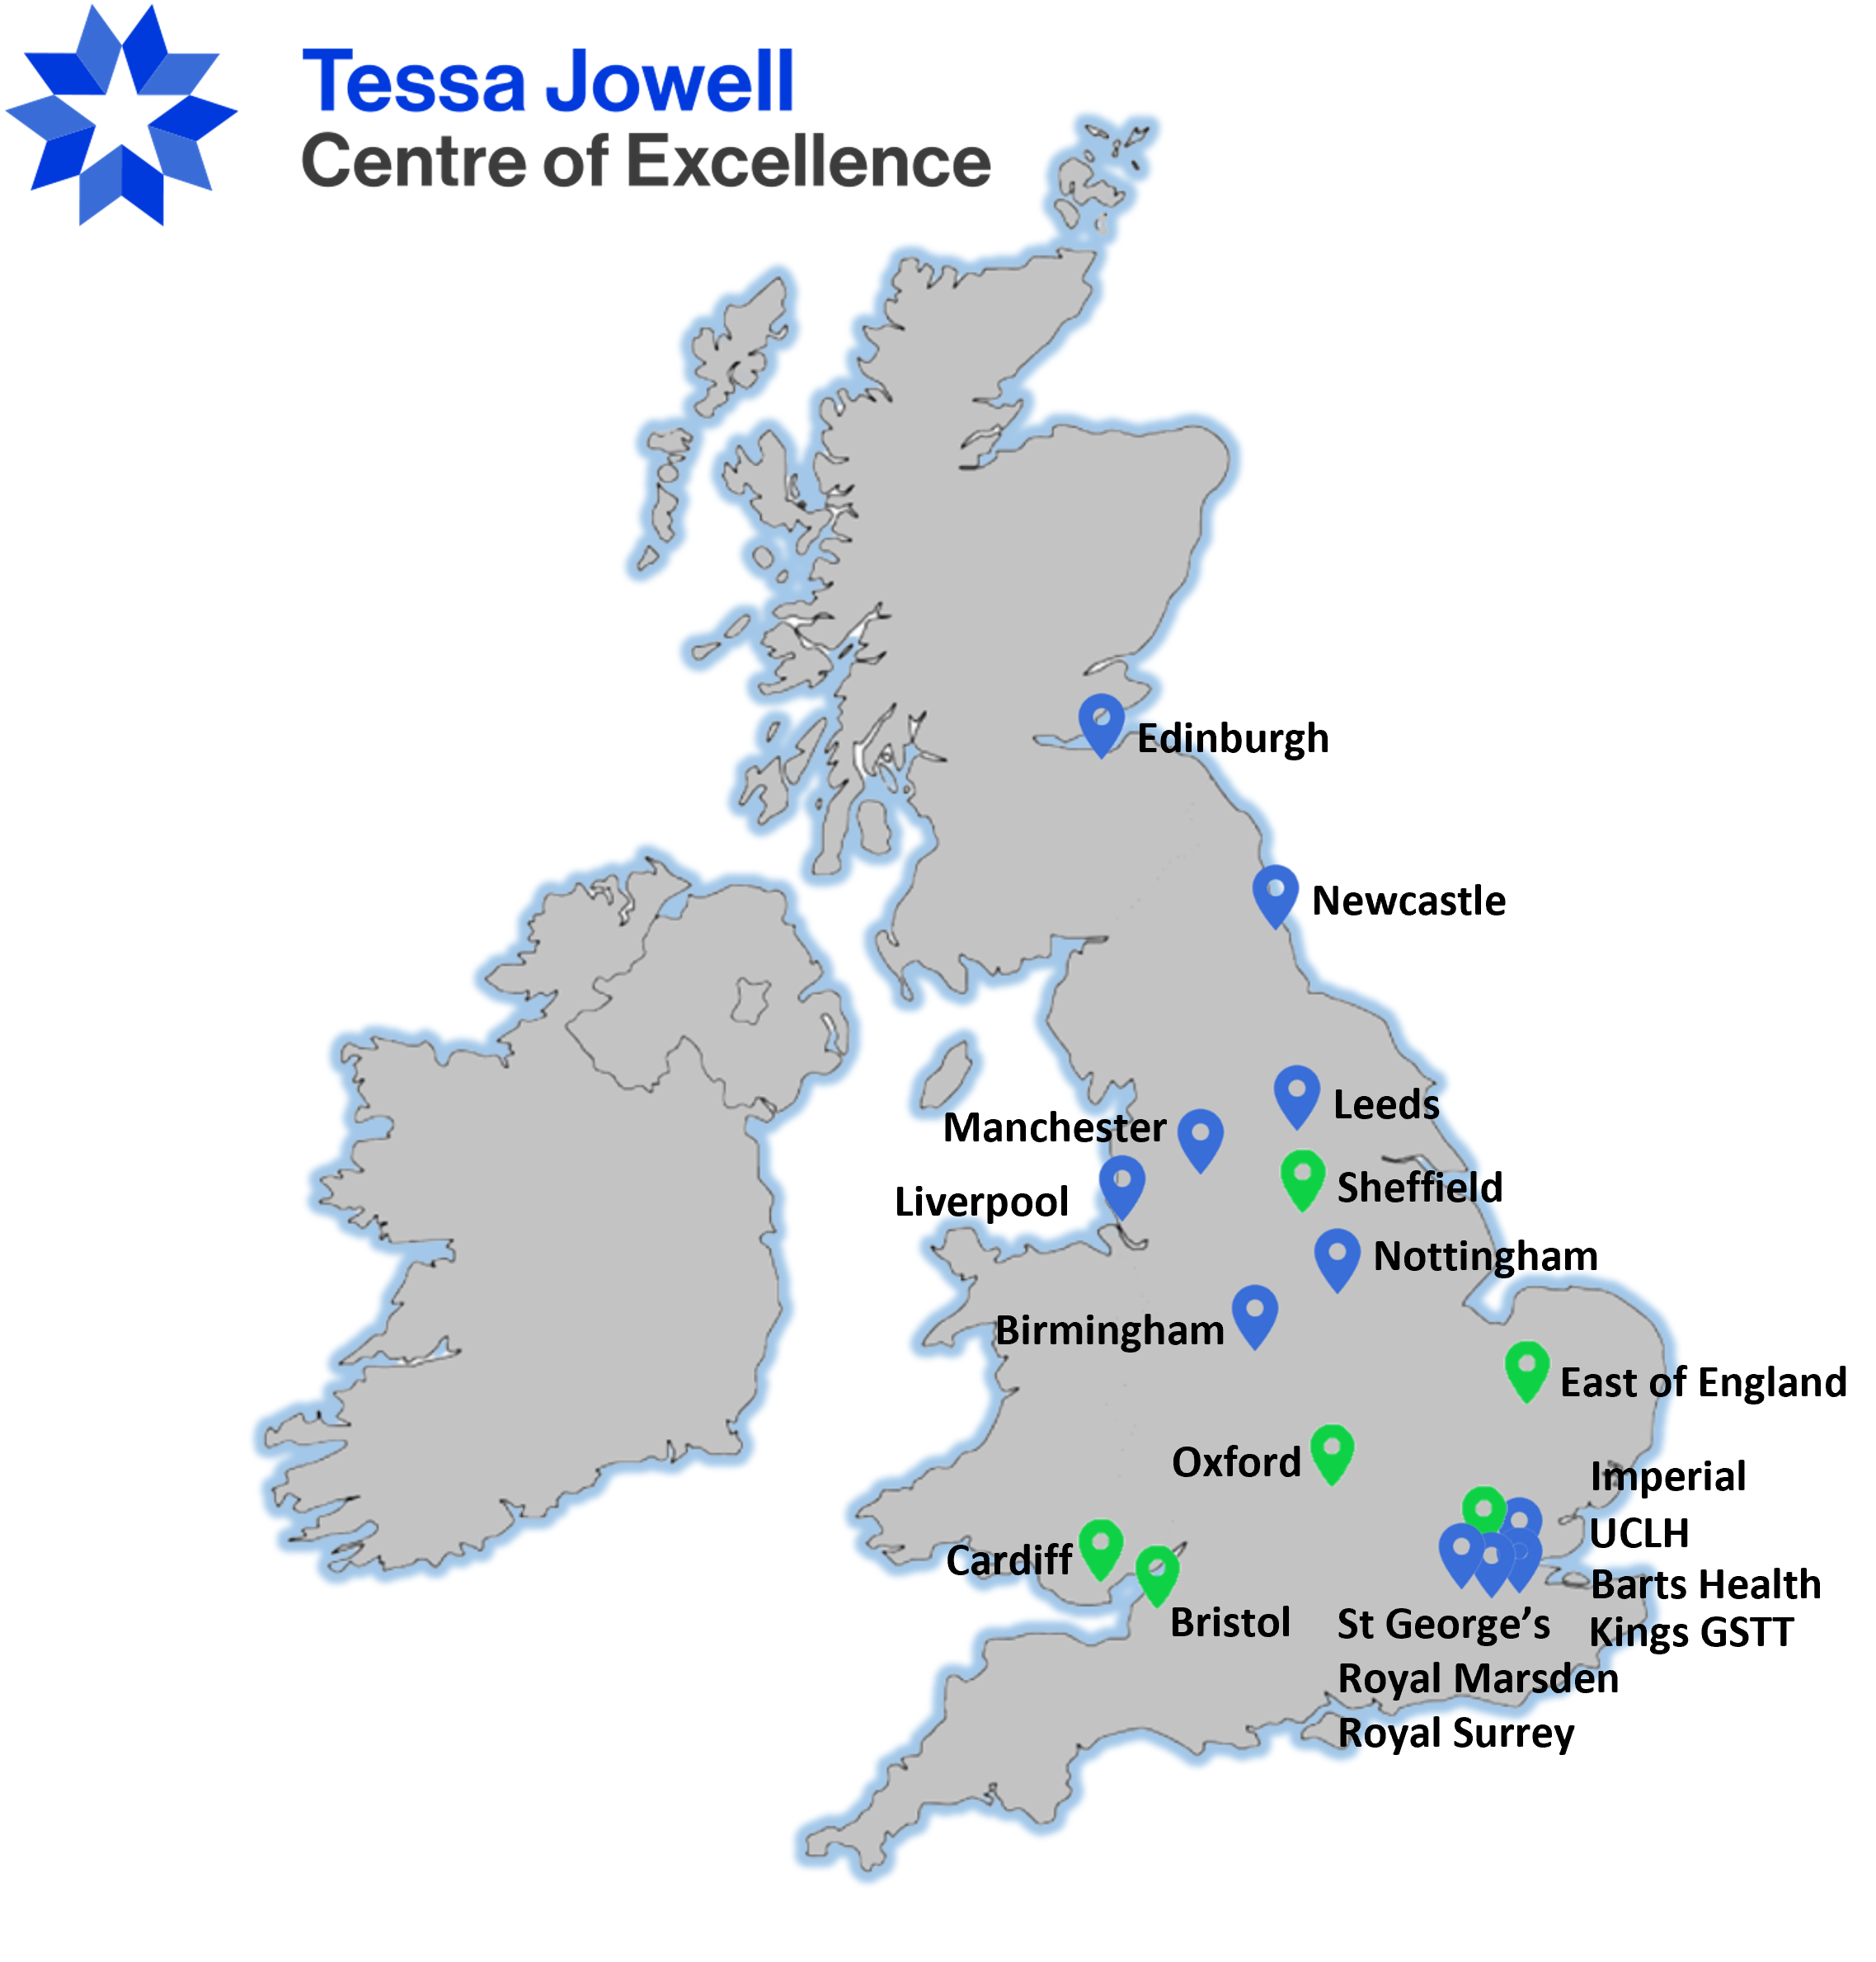 Tessa Jowell Centres of Excellence (new centres in green; previously designated centres in blue)